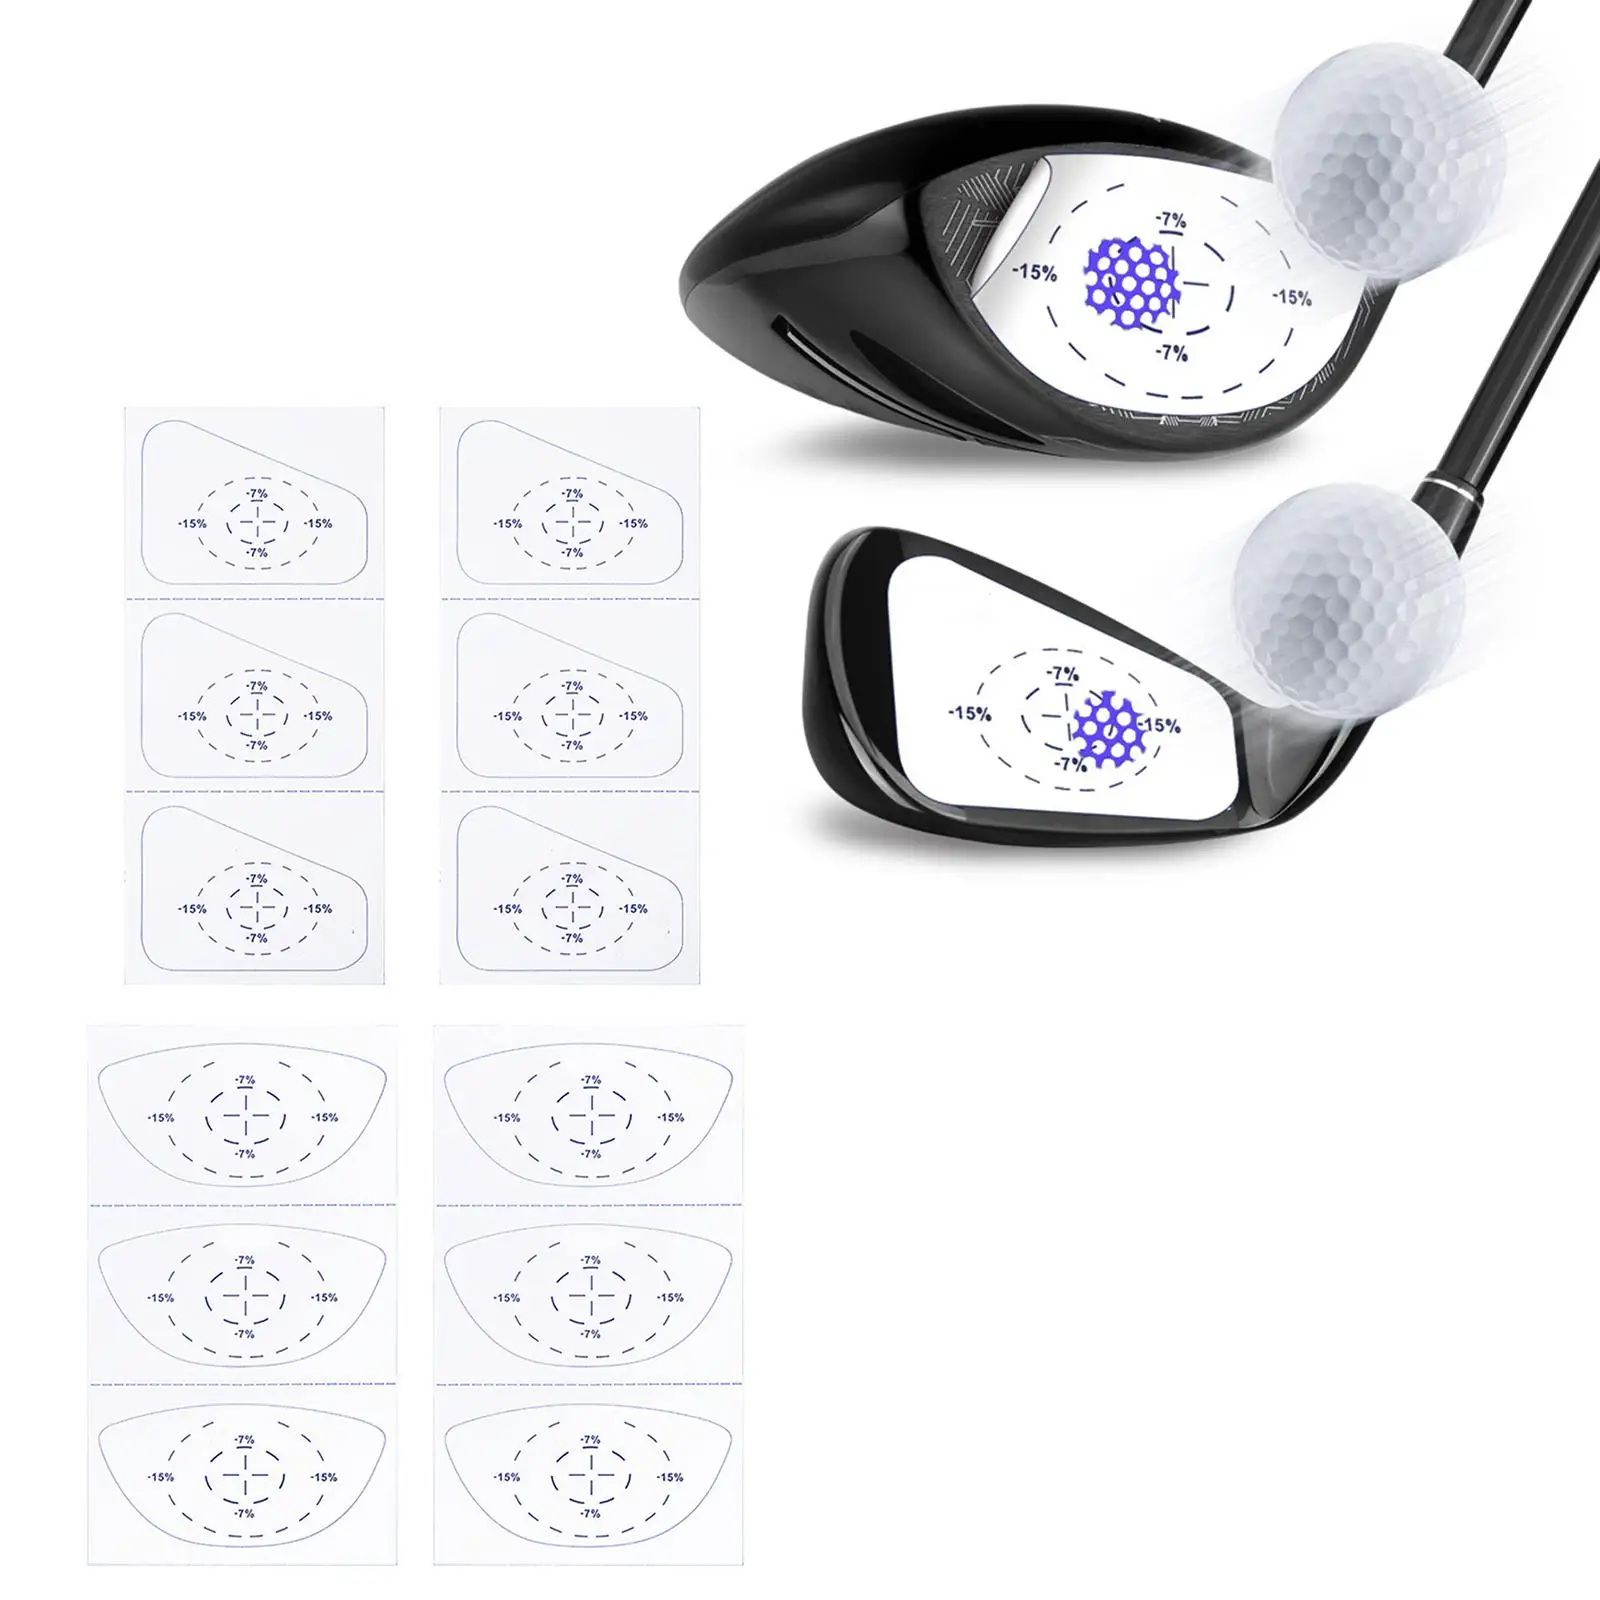 Golf Impact Stickers Sticker for Golf Clubs Accuracy Golf Training Stickers Consistency Analysis Golf Impact Tape Set Men Women